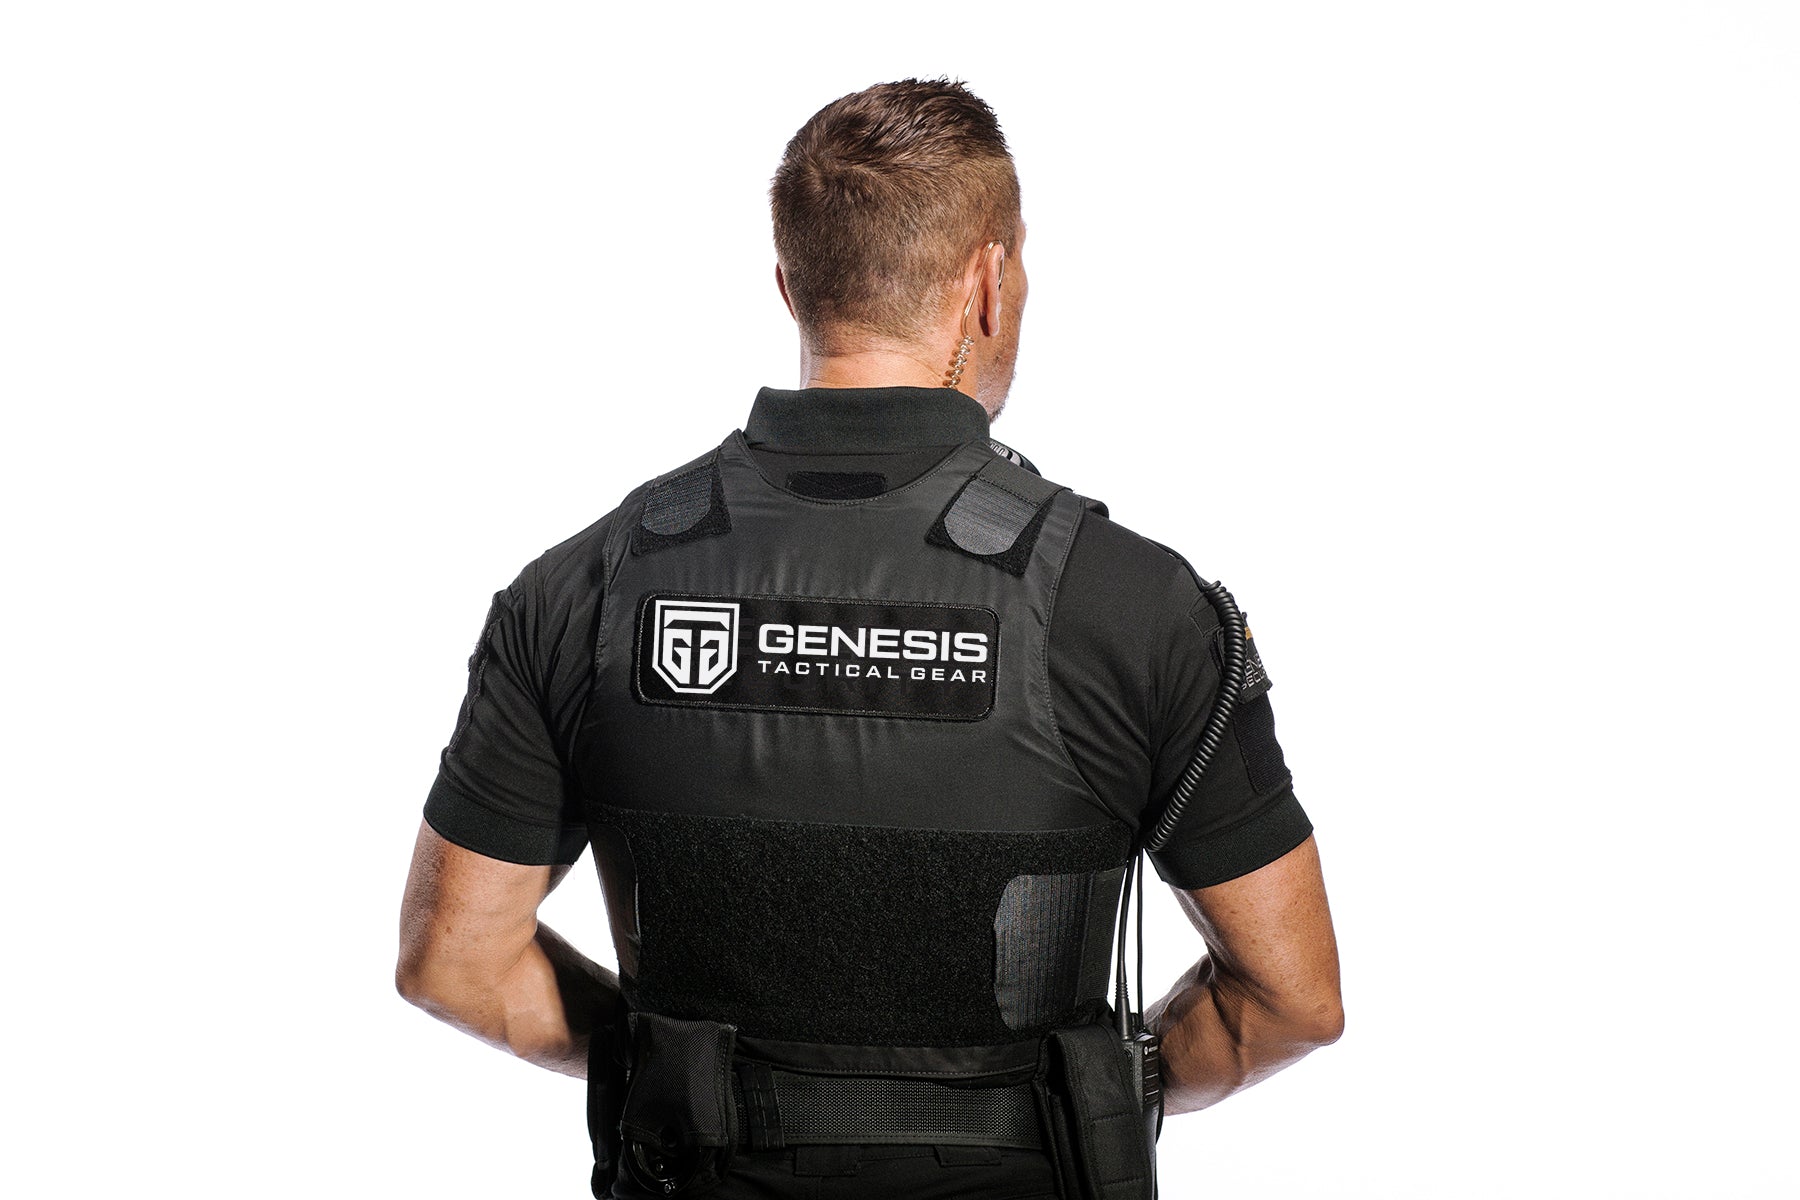 Stab-Proof Vest I (Cop Style) – Genesis Tactical Gear